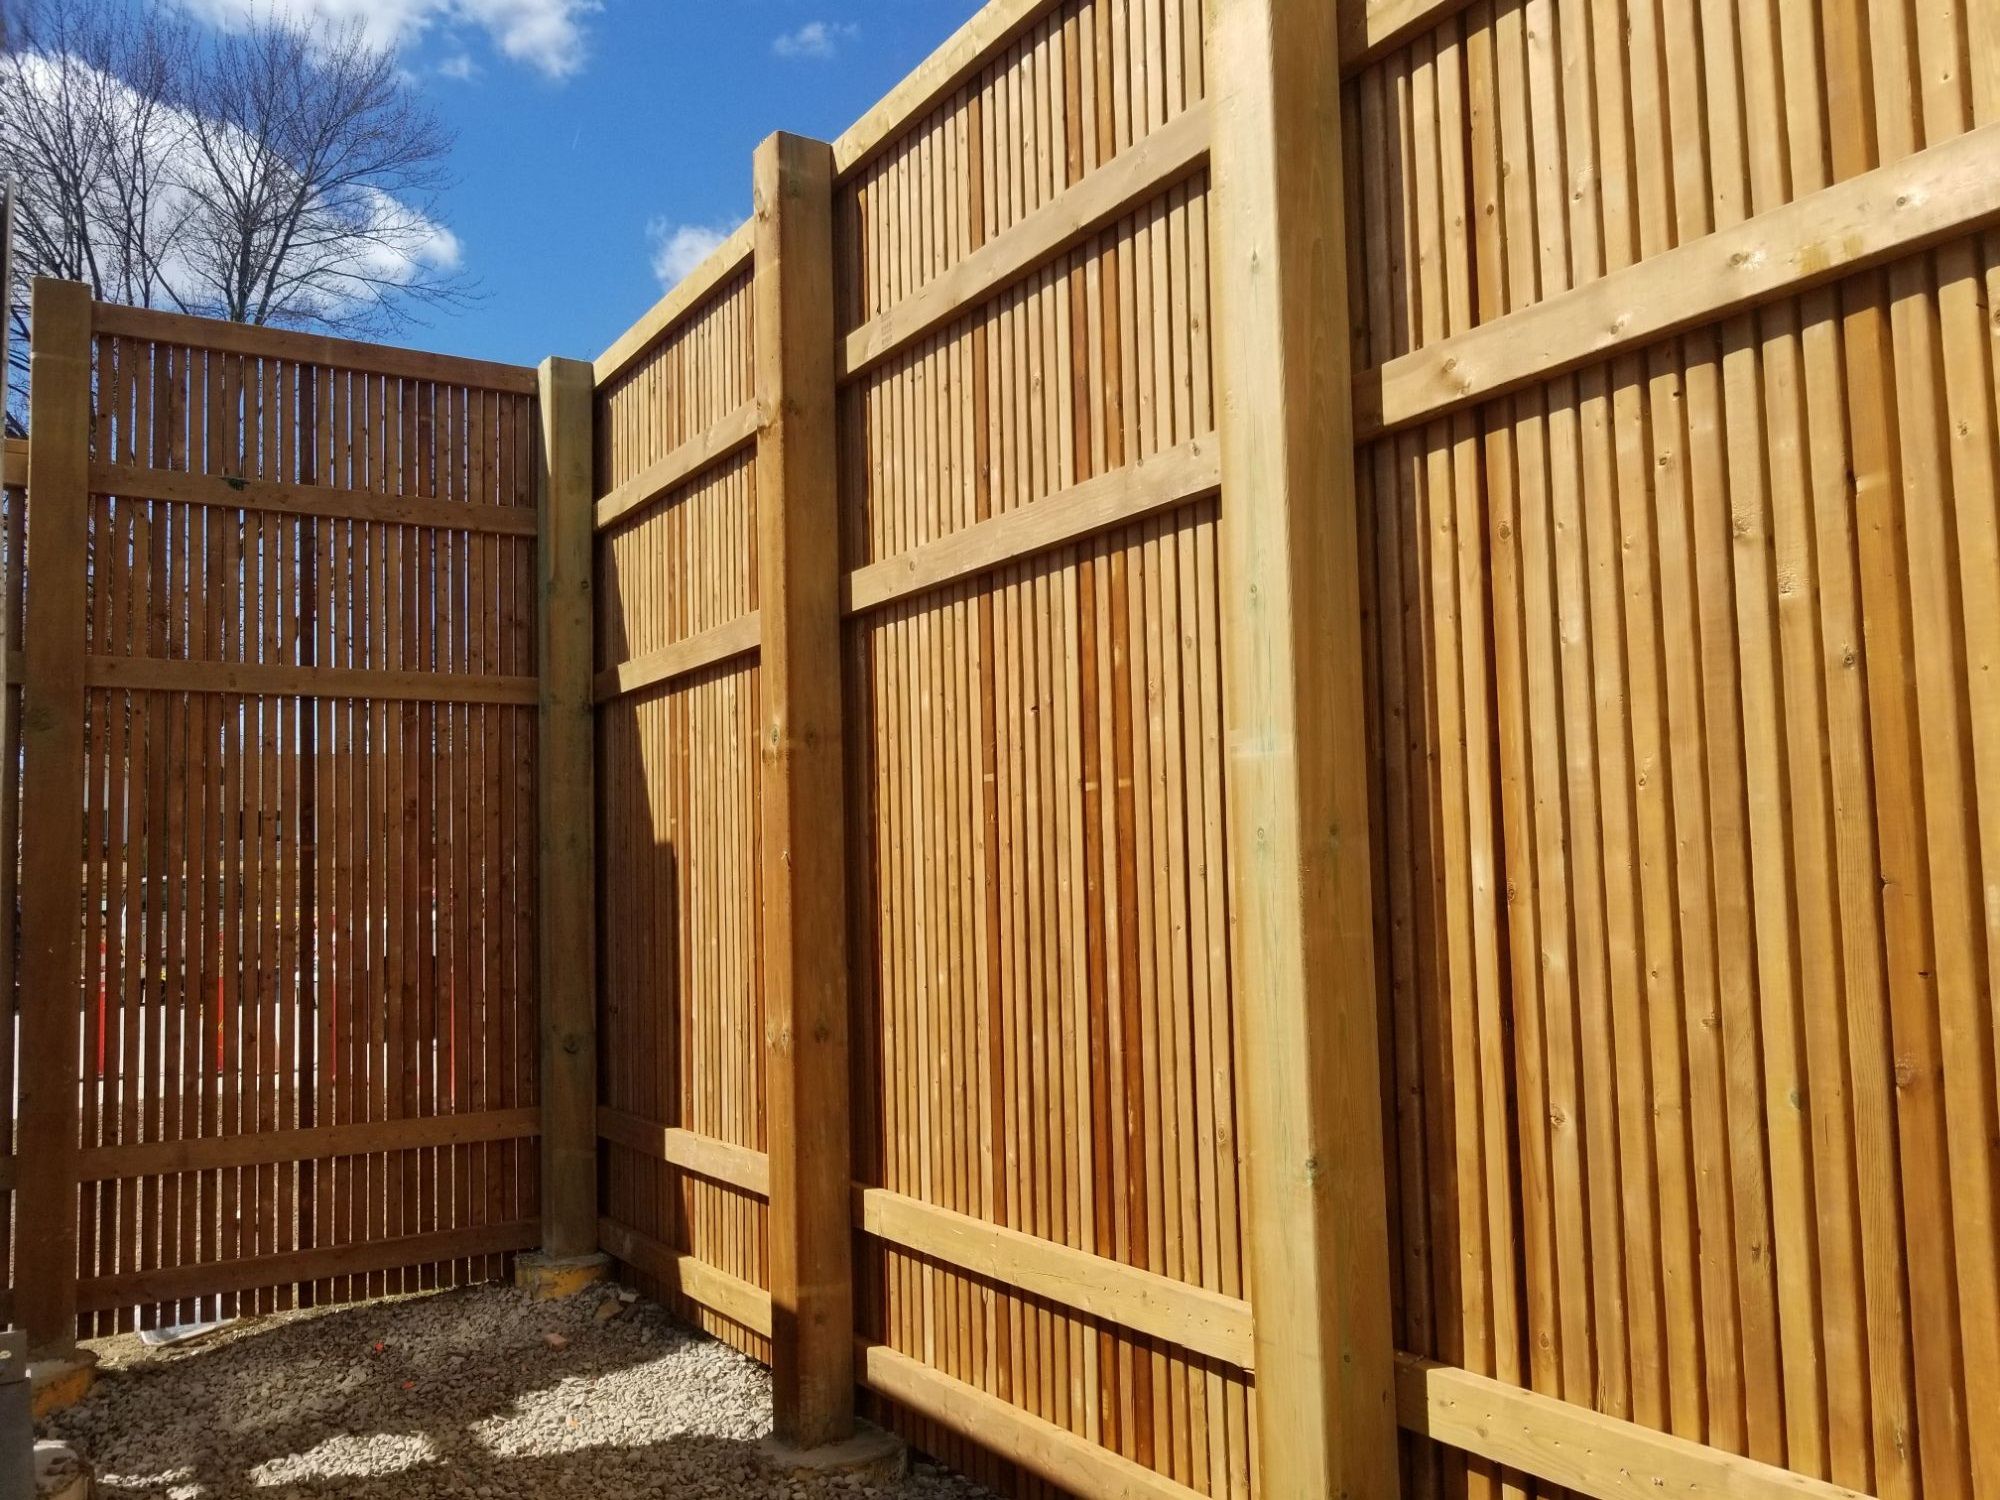 Custom built wood fence for the Leamington Hospital, this 2 x 2 clad fence 10 foot tall protected the air handlers from any vandals. The result was stunning.